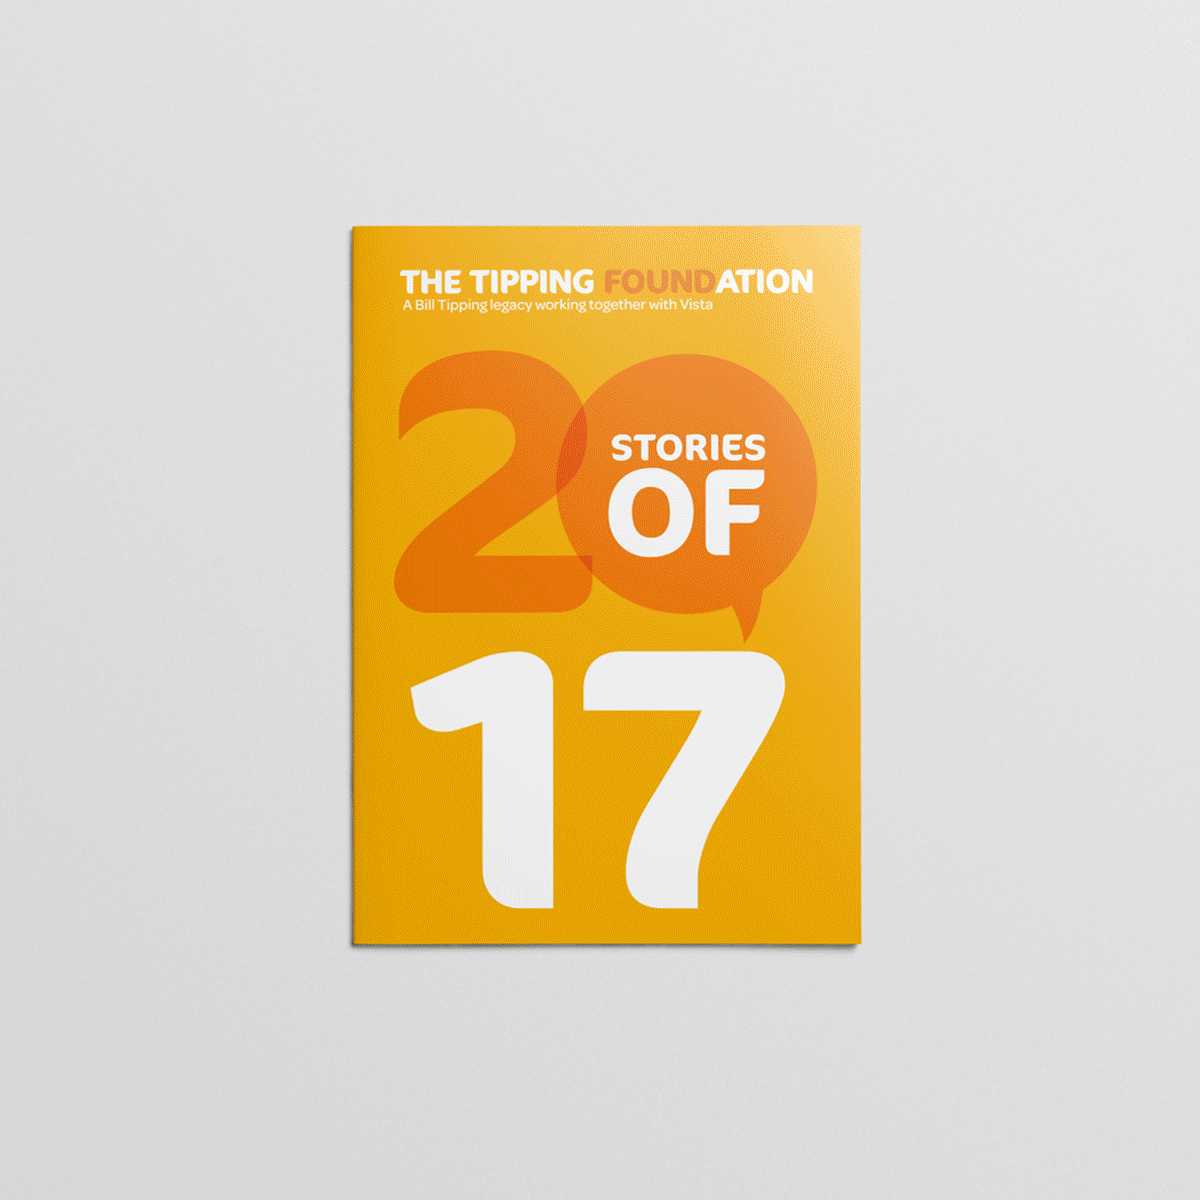 The Tipping Foundation Report Inset Booklet with Client Stories of 2017